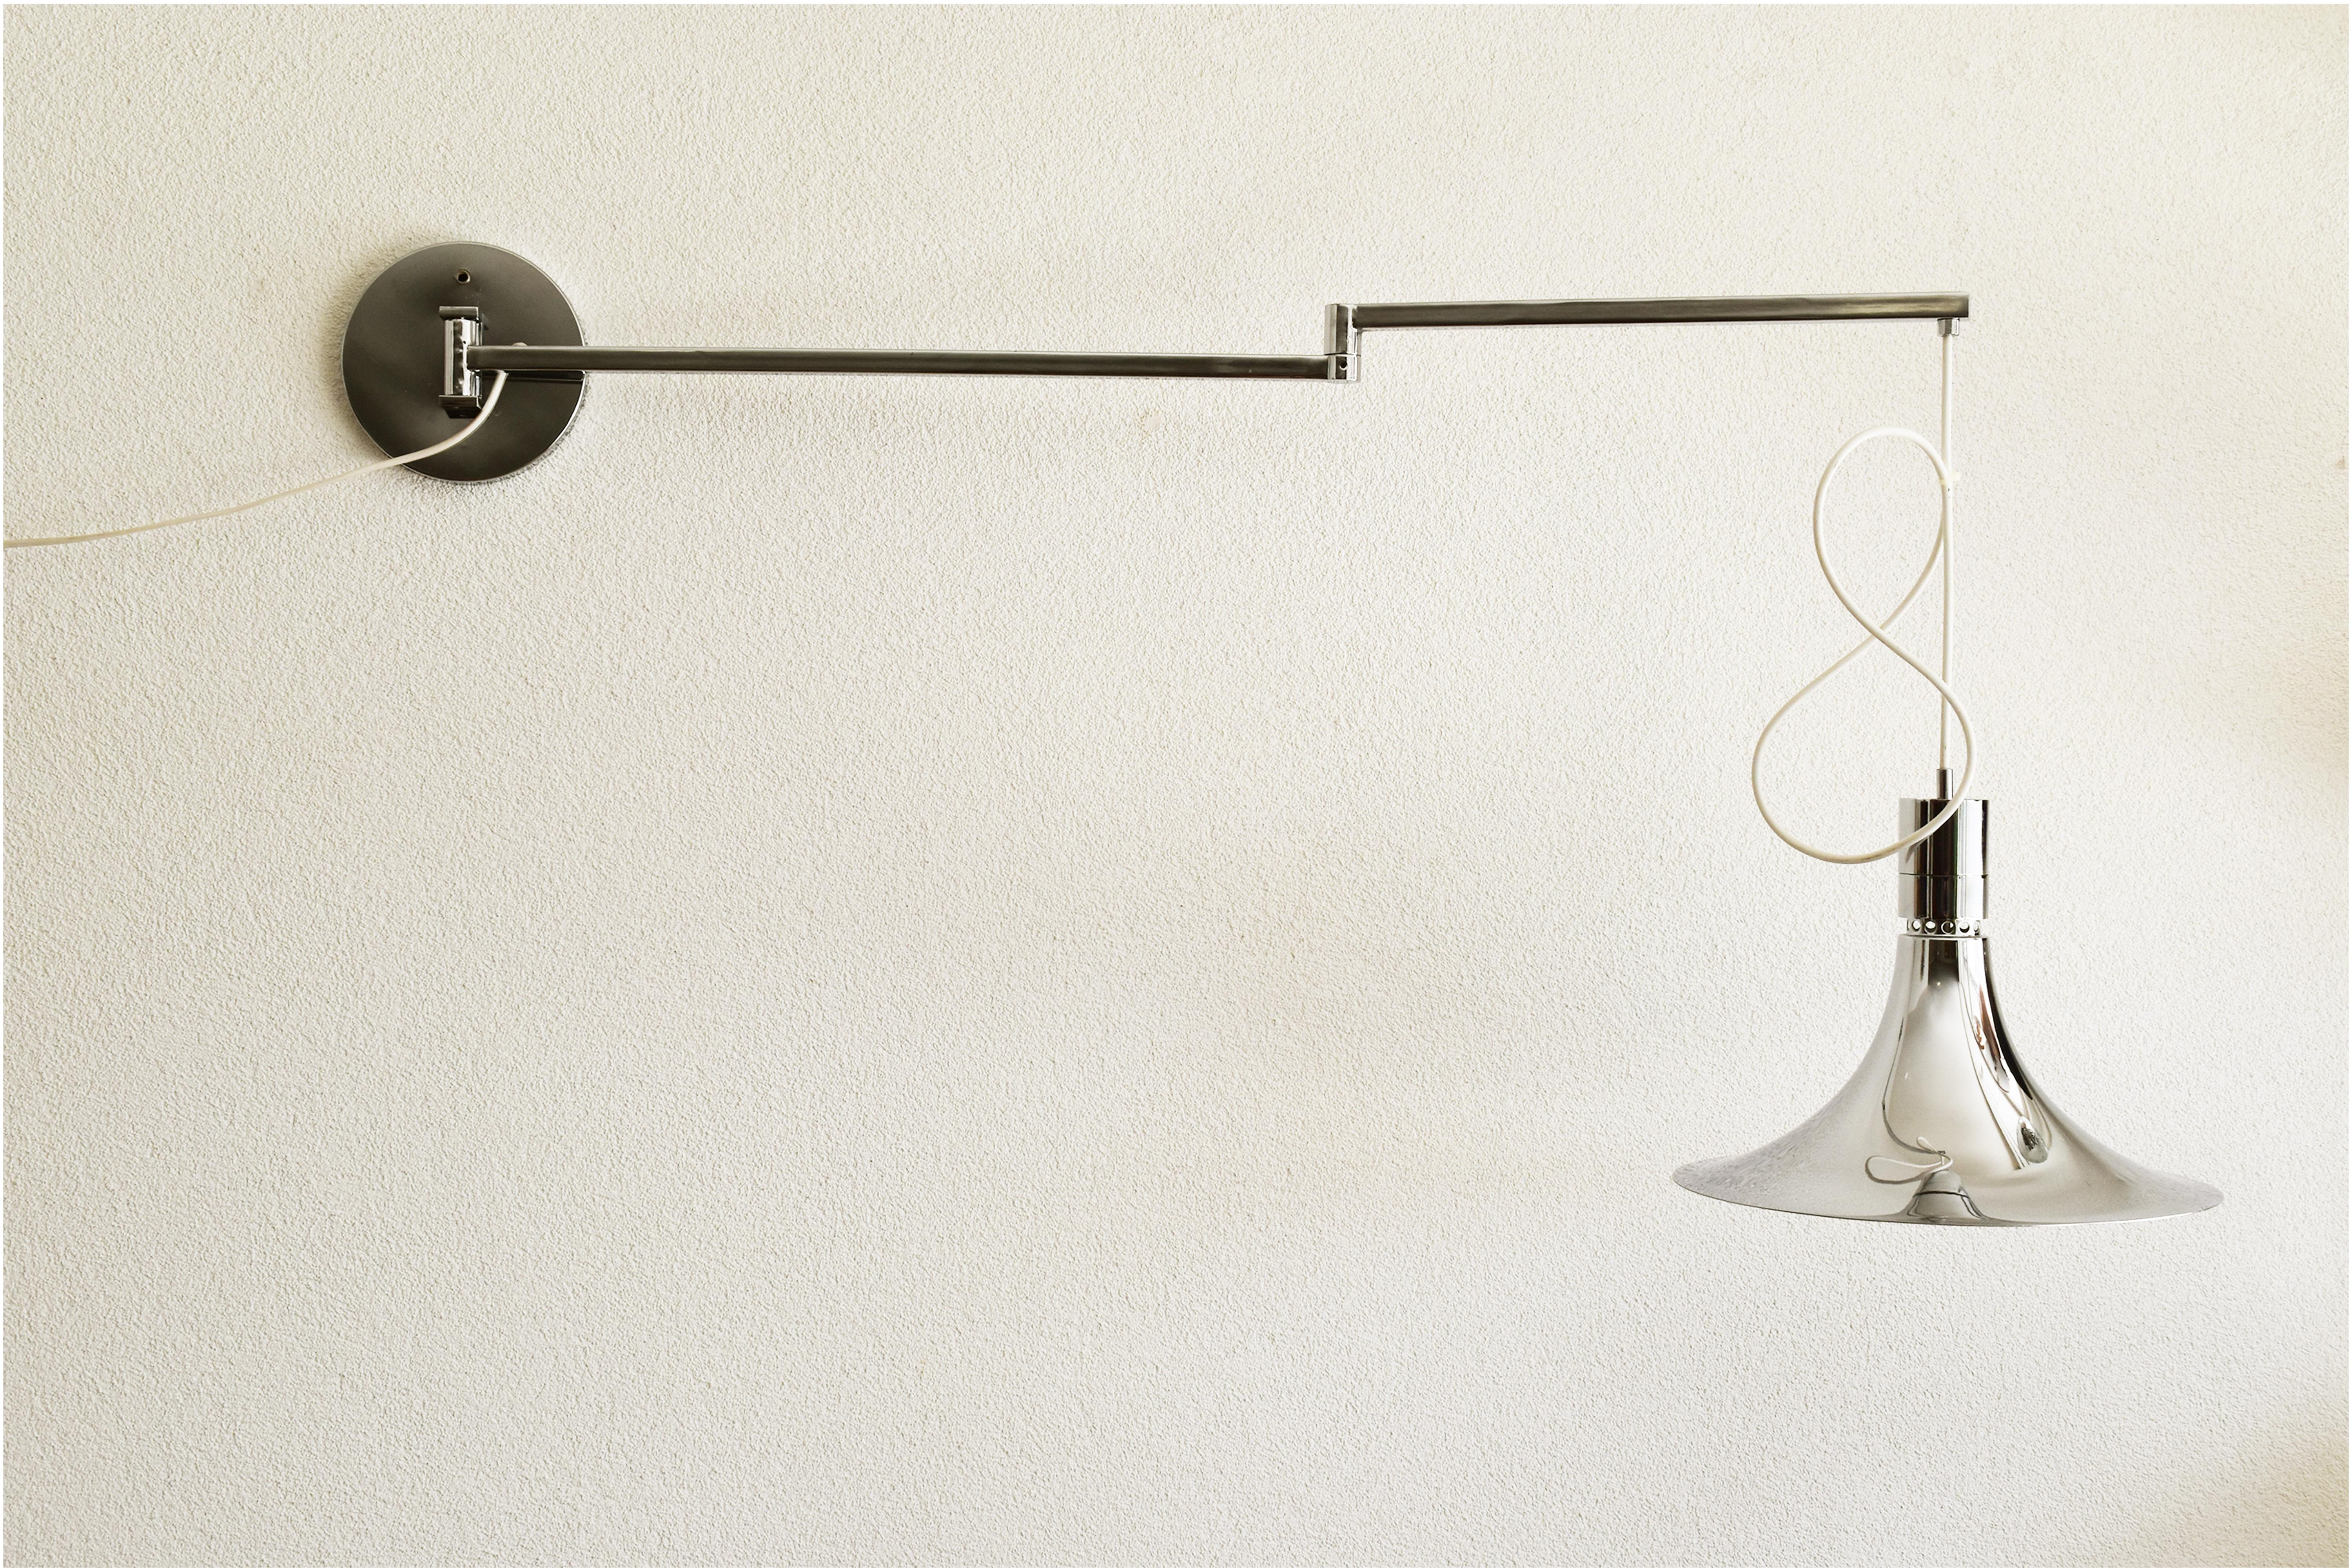 Italian AM/AS Wall Lamp with Chromed Swing Arm by Franco Albini for Sirrah, 1960, Italy For Sale